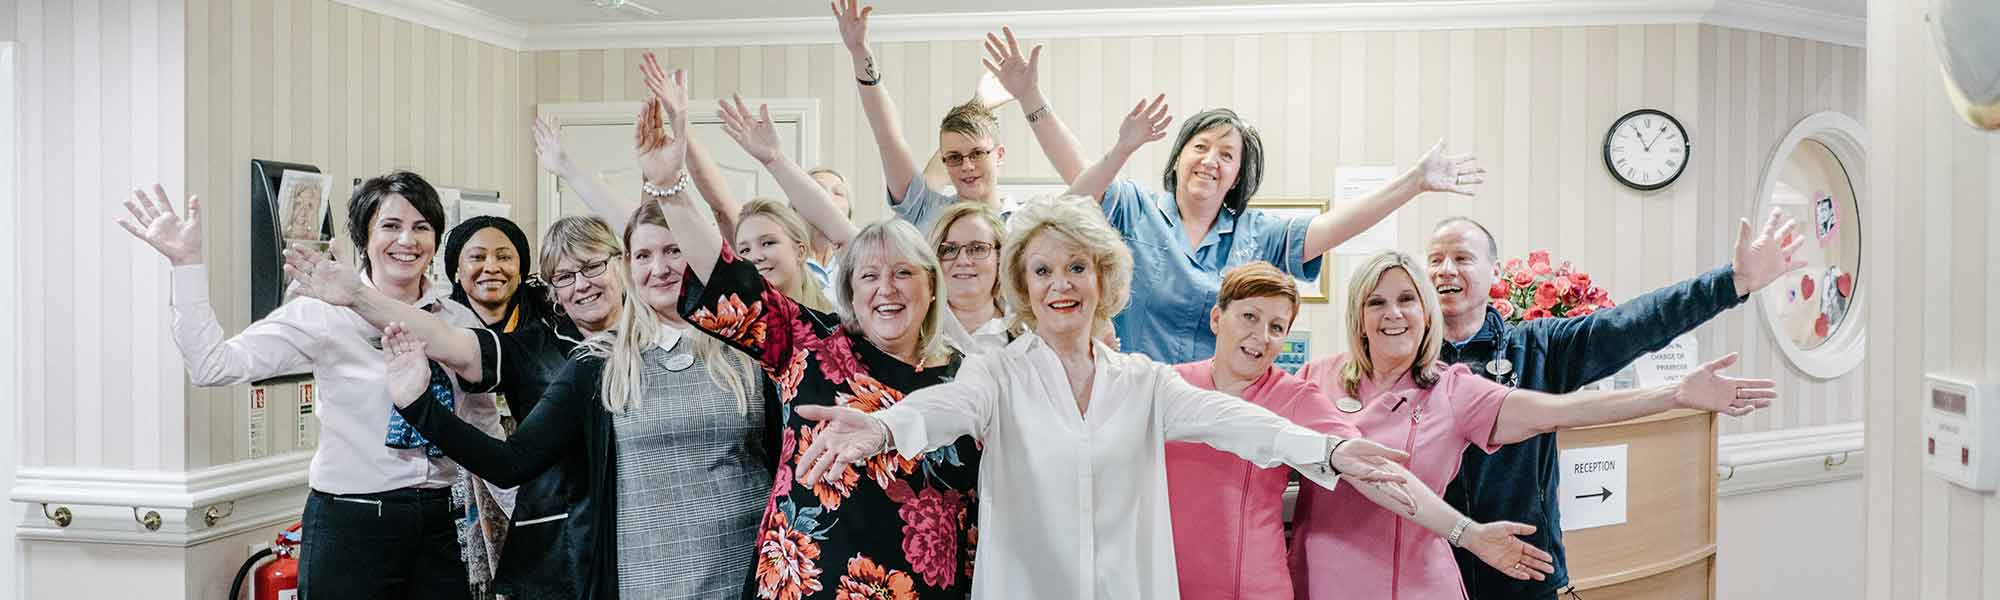 Acacia Mews Care Home Hatfield Sherrie Hewson staff employees jazz hands manager well-being smiles banner hero